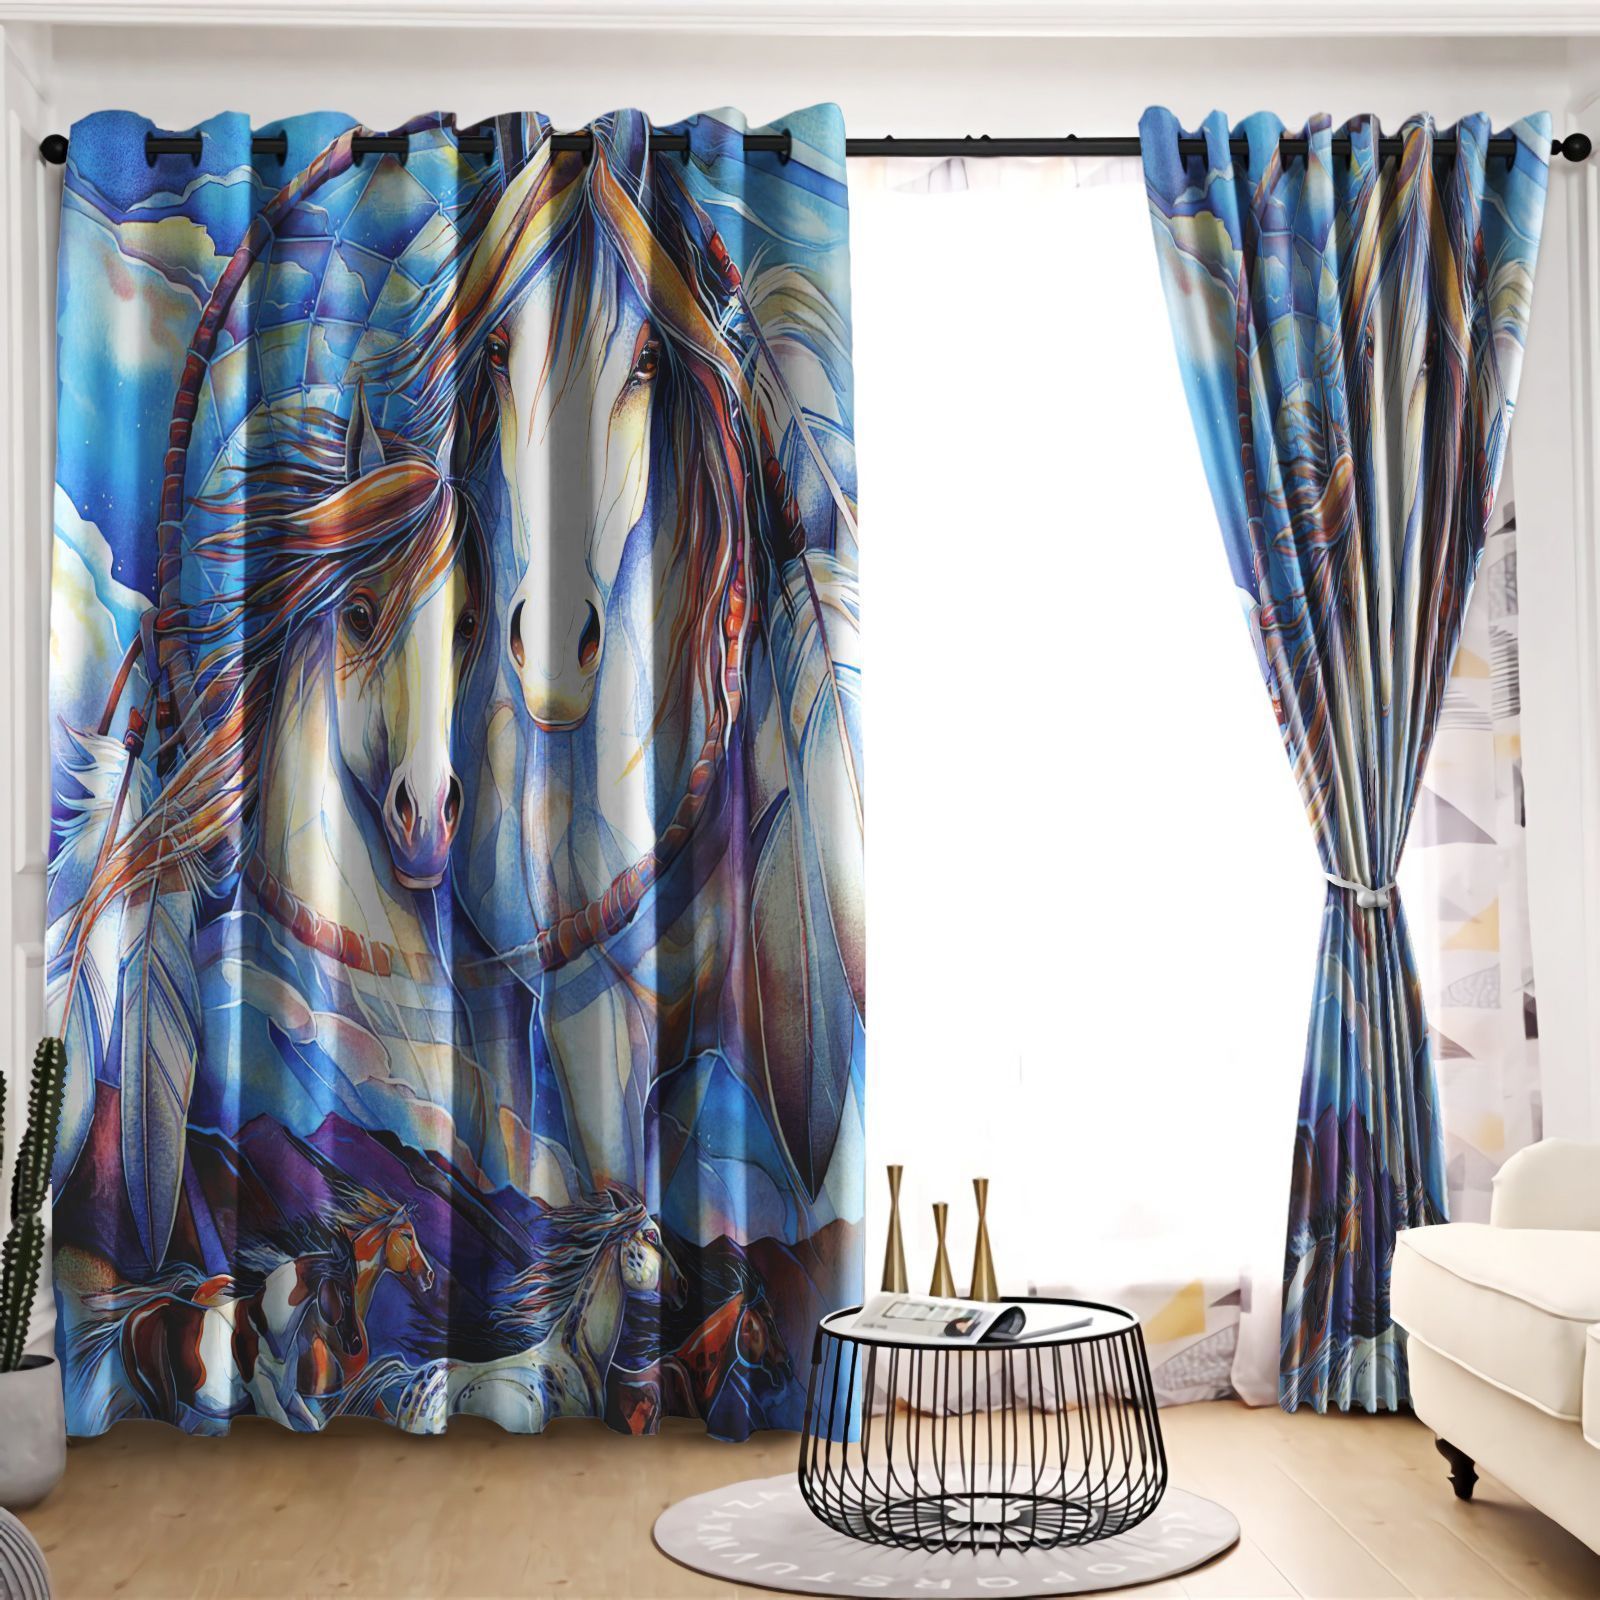 Attractive Horse With Blue Theme Printed Window Curtains Home Decor